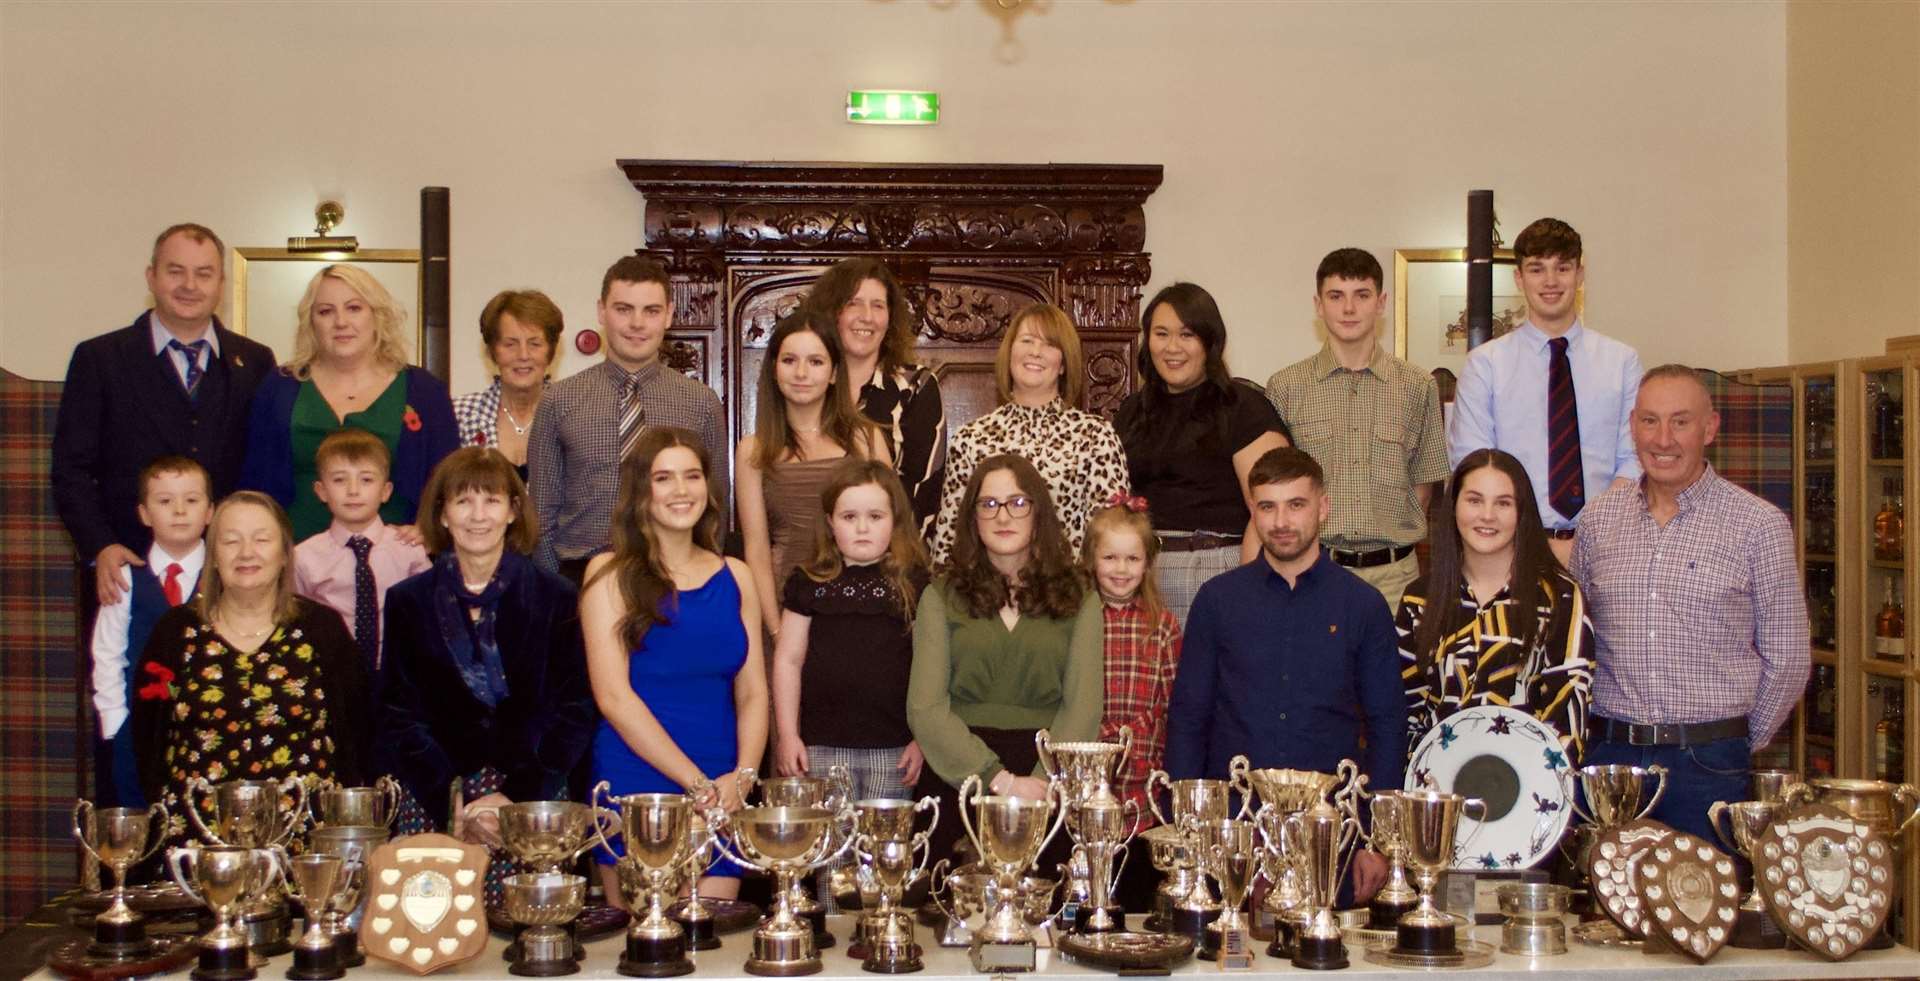 Winners from the 2022 Latheron Show with their trophies.